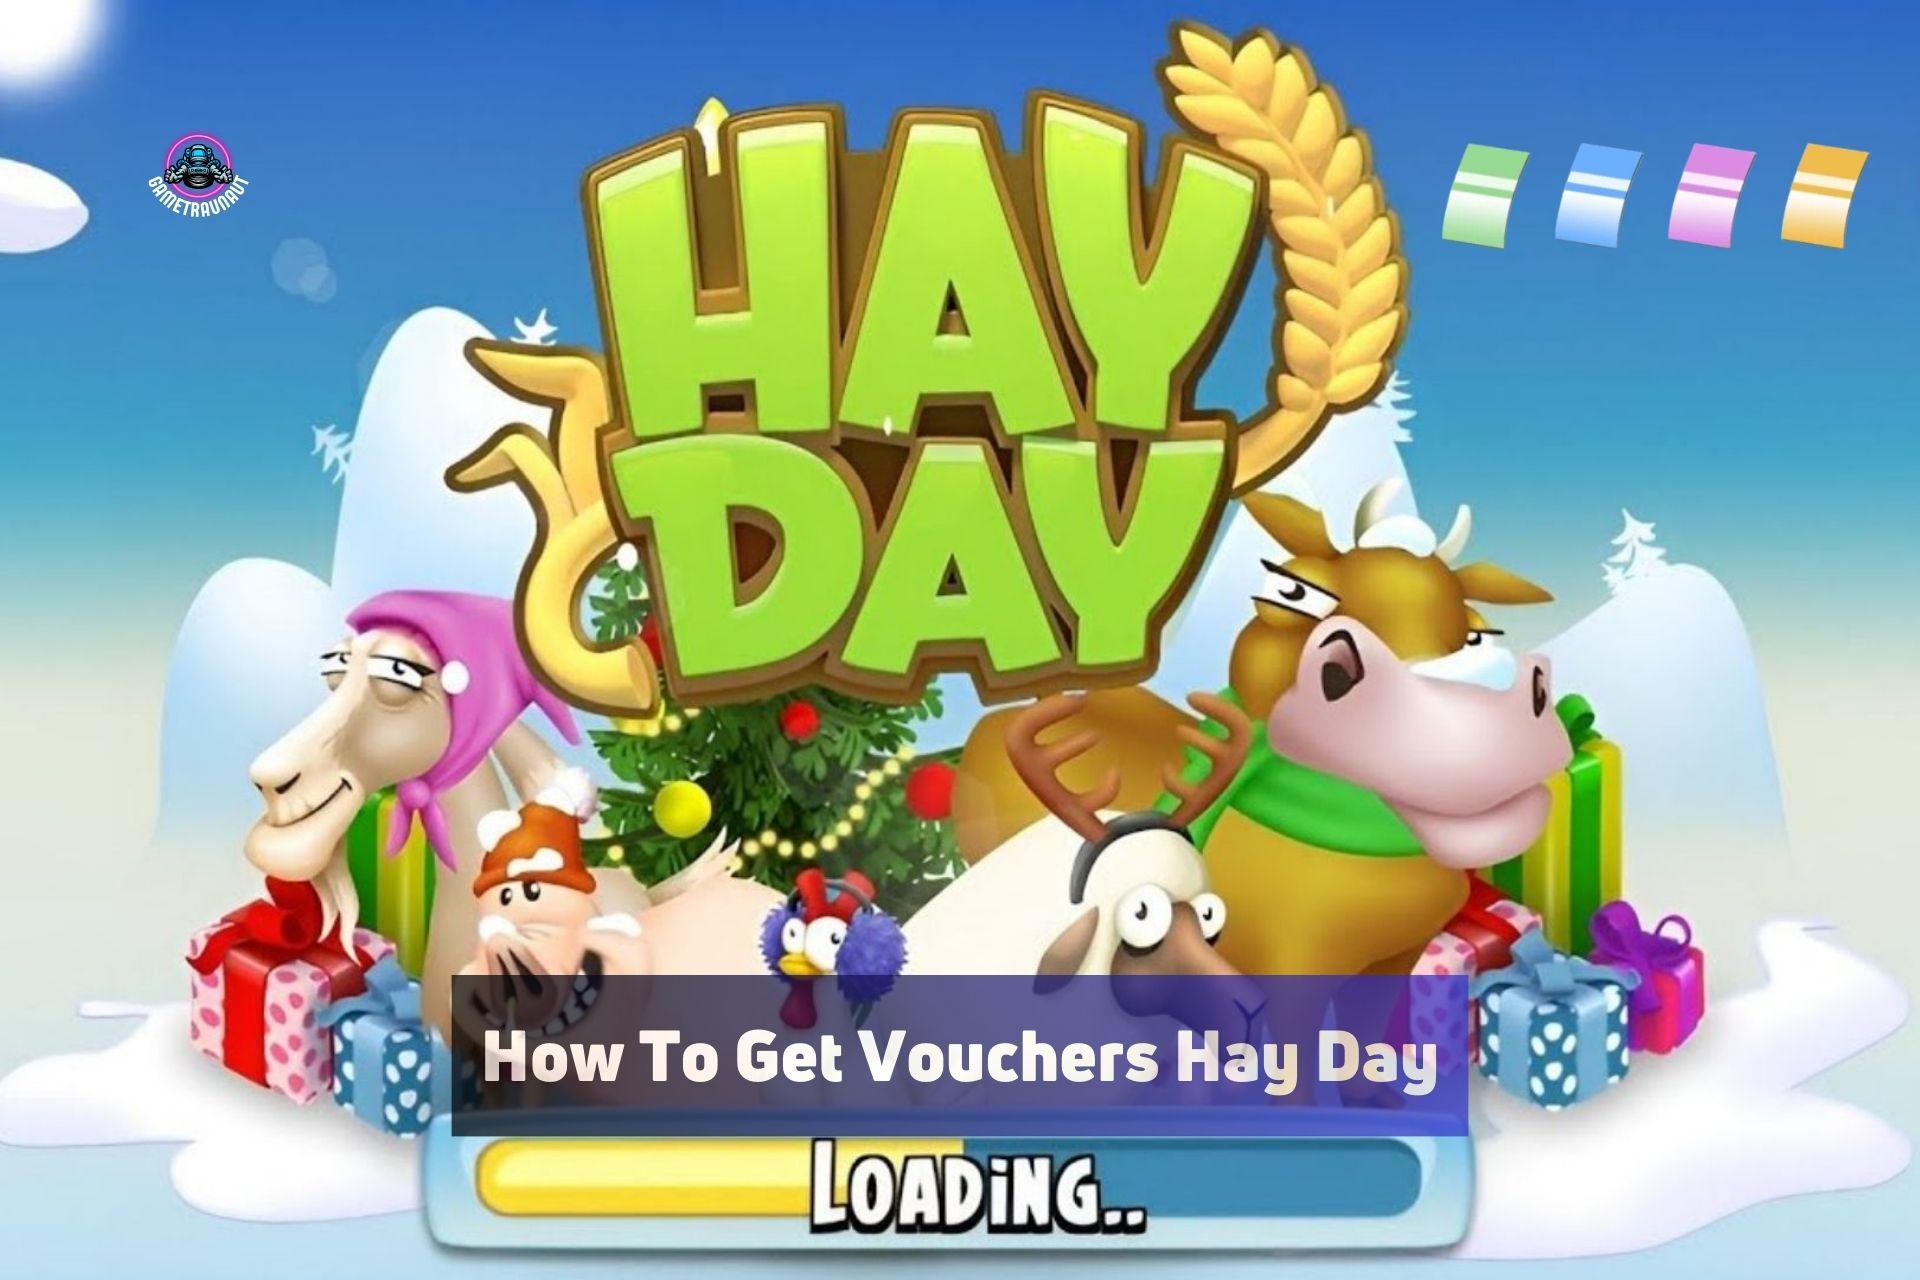 How To Get Vouchers Hay Day